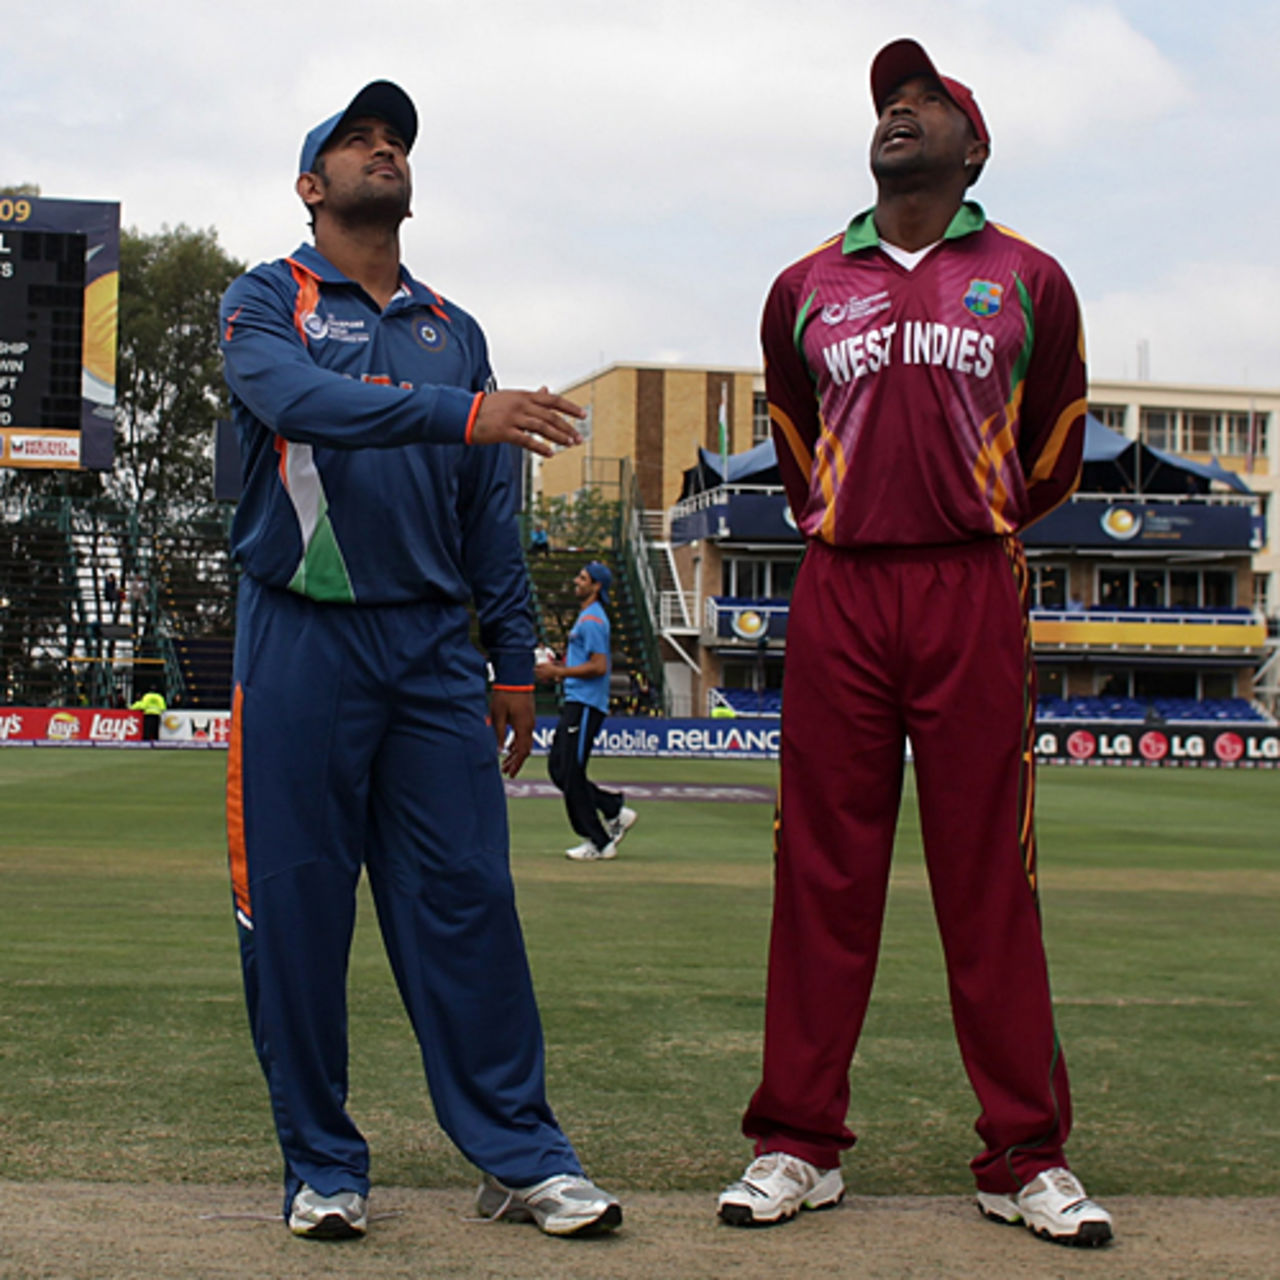 MS Dhoni and Floyd Reifer at the toss, India v West Indies, Champions Trophy, Group A, Johannesburg, September 30, 2009